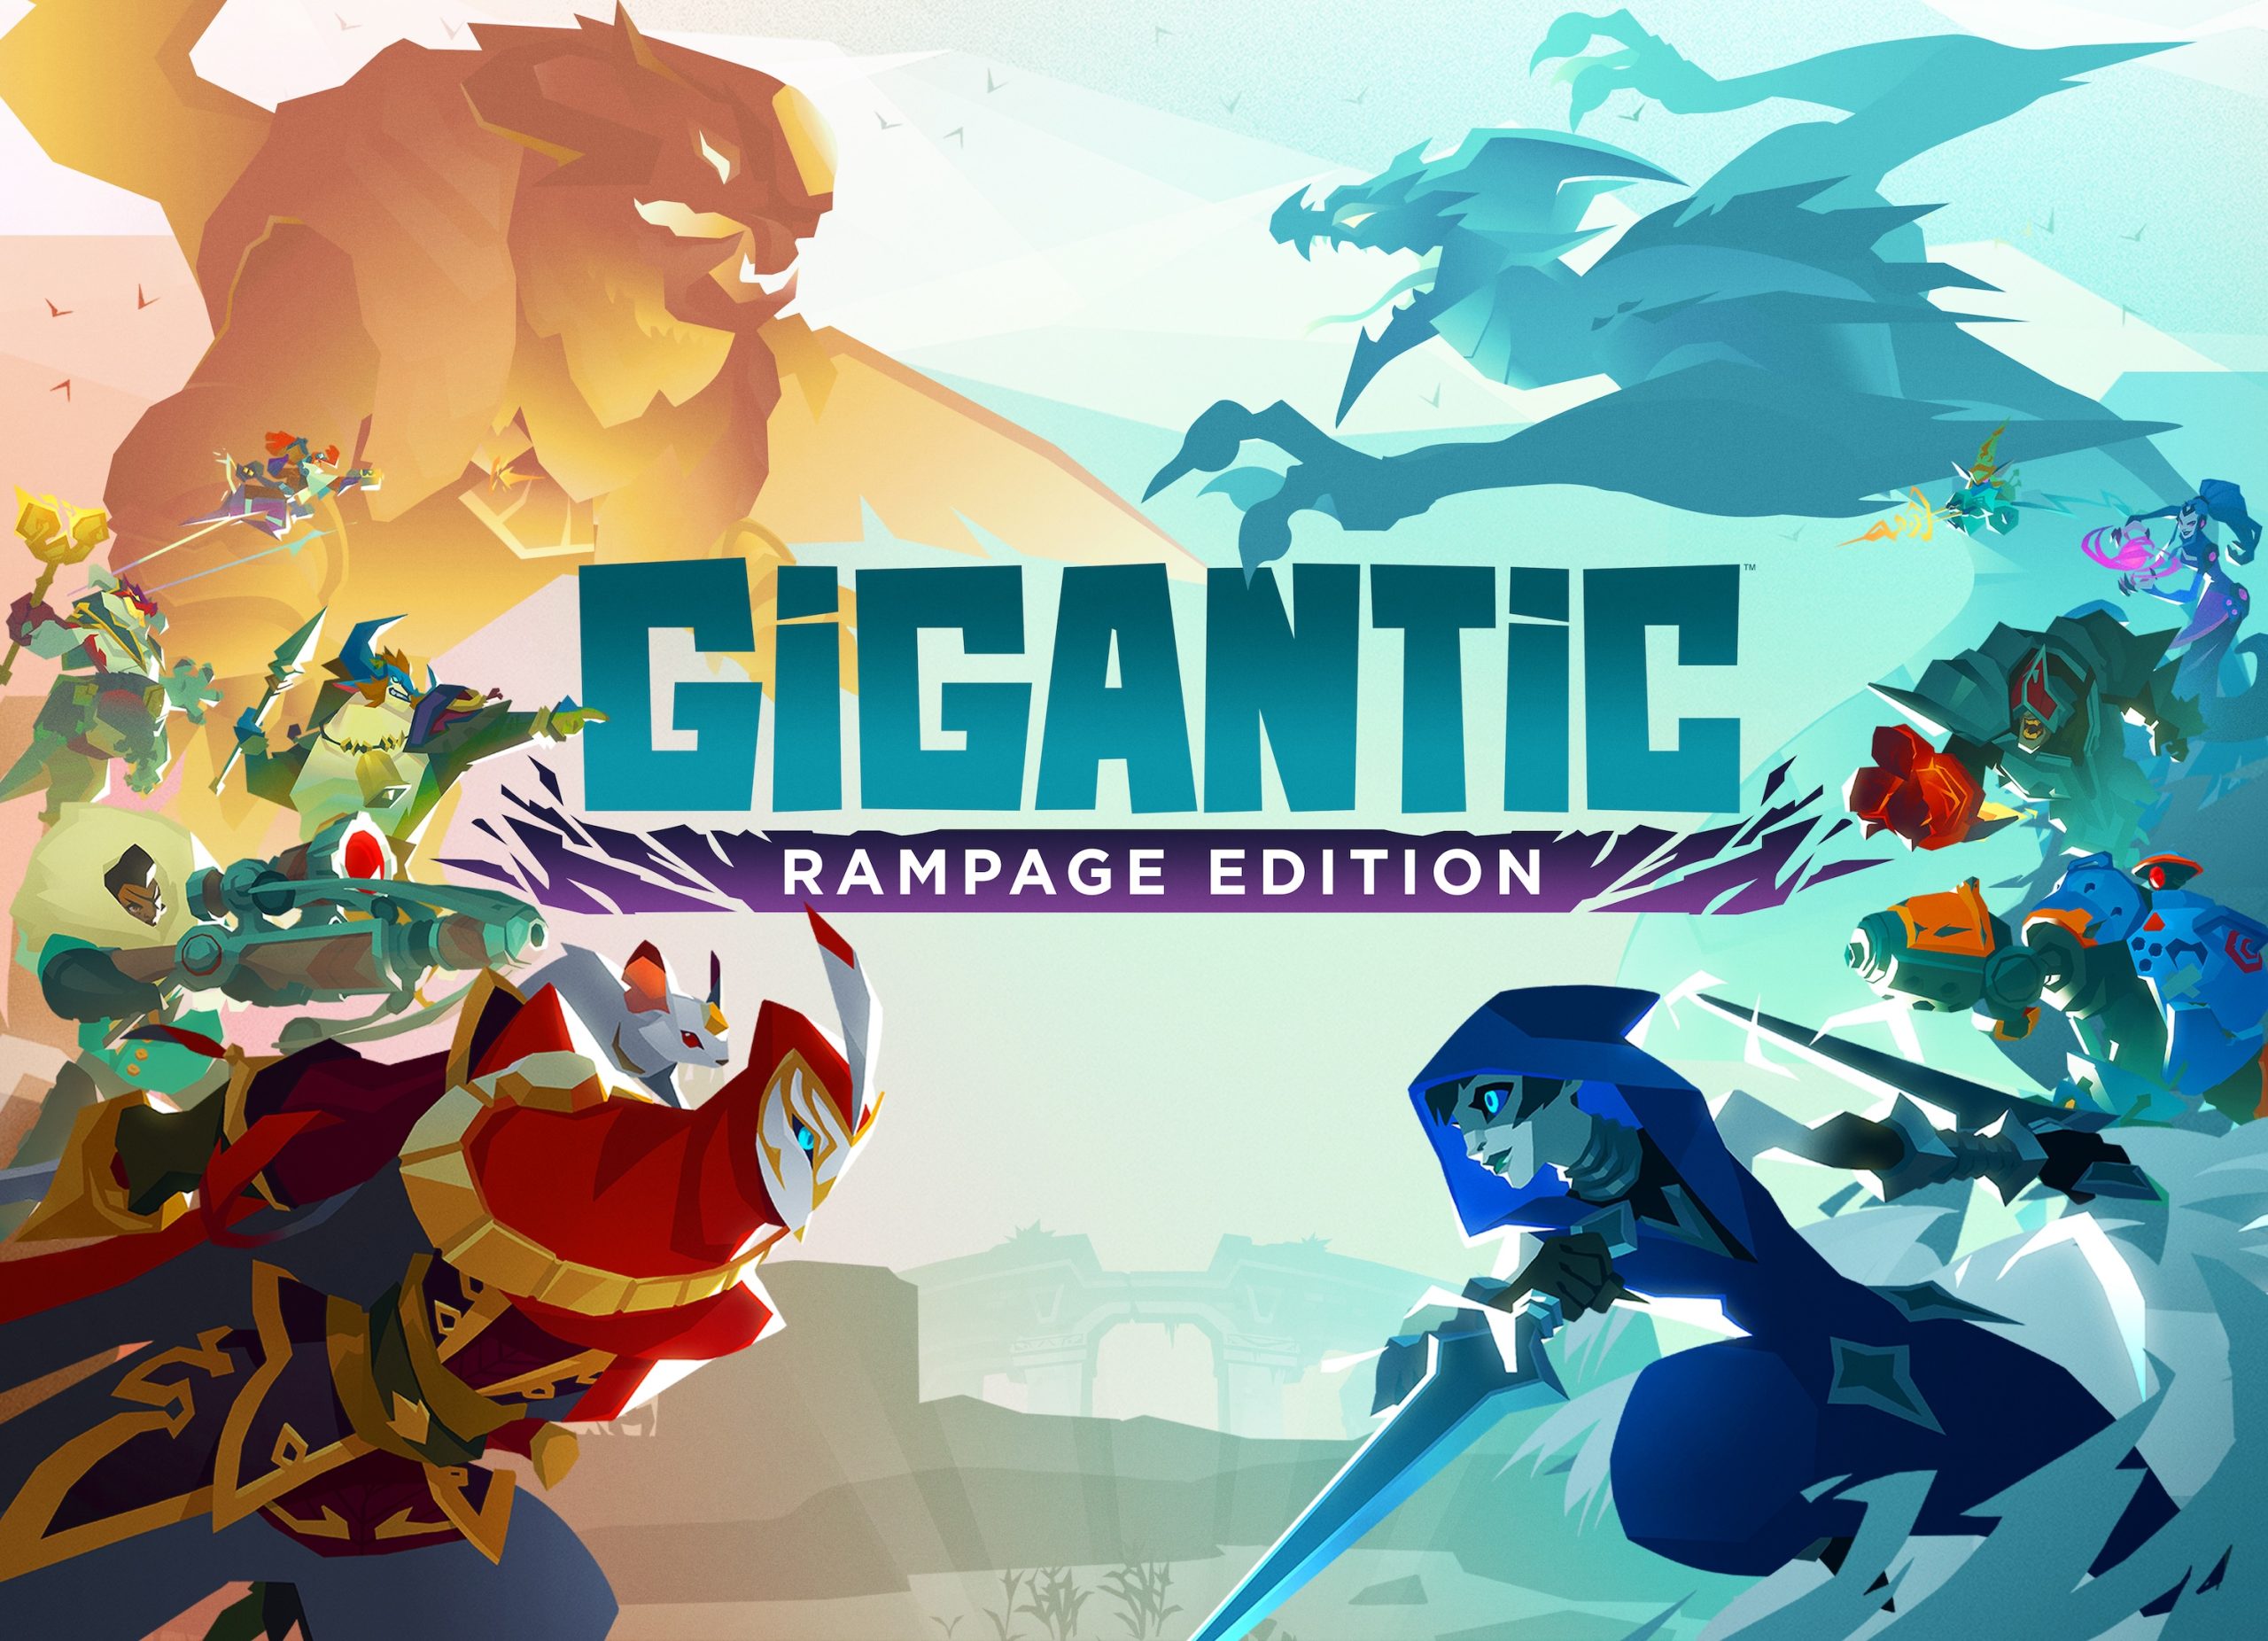 Gigantic lives on in Gigantic: Rampage Edition this April